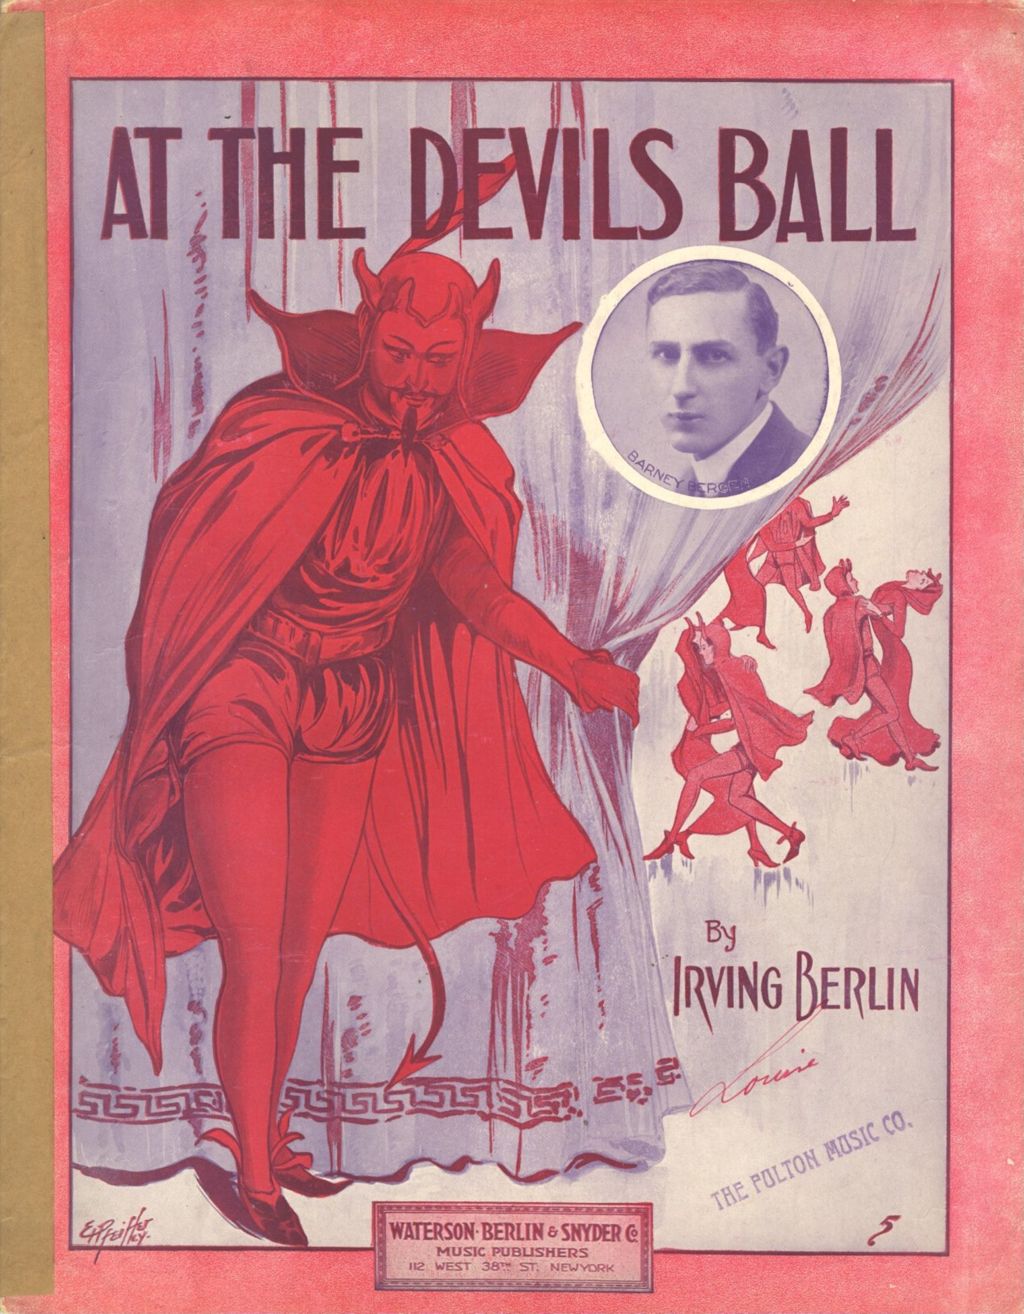 At the Devil's Ball